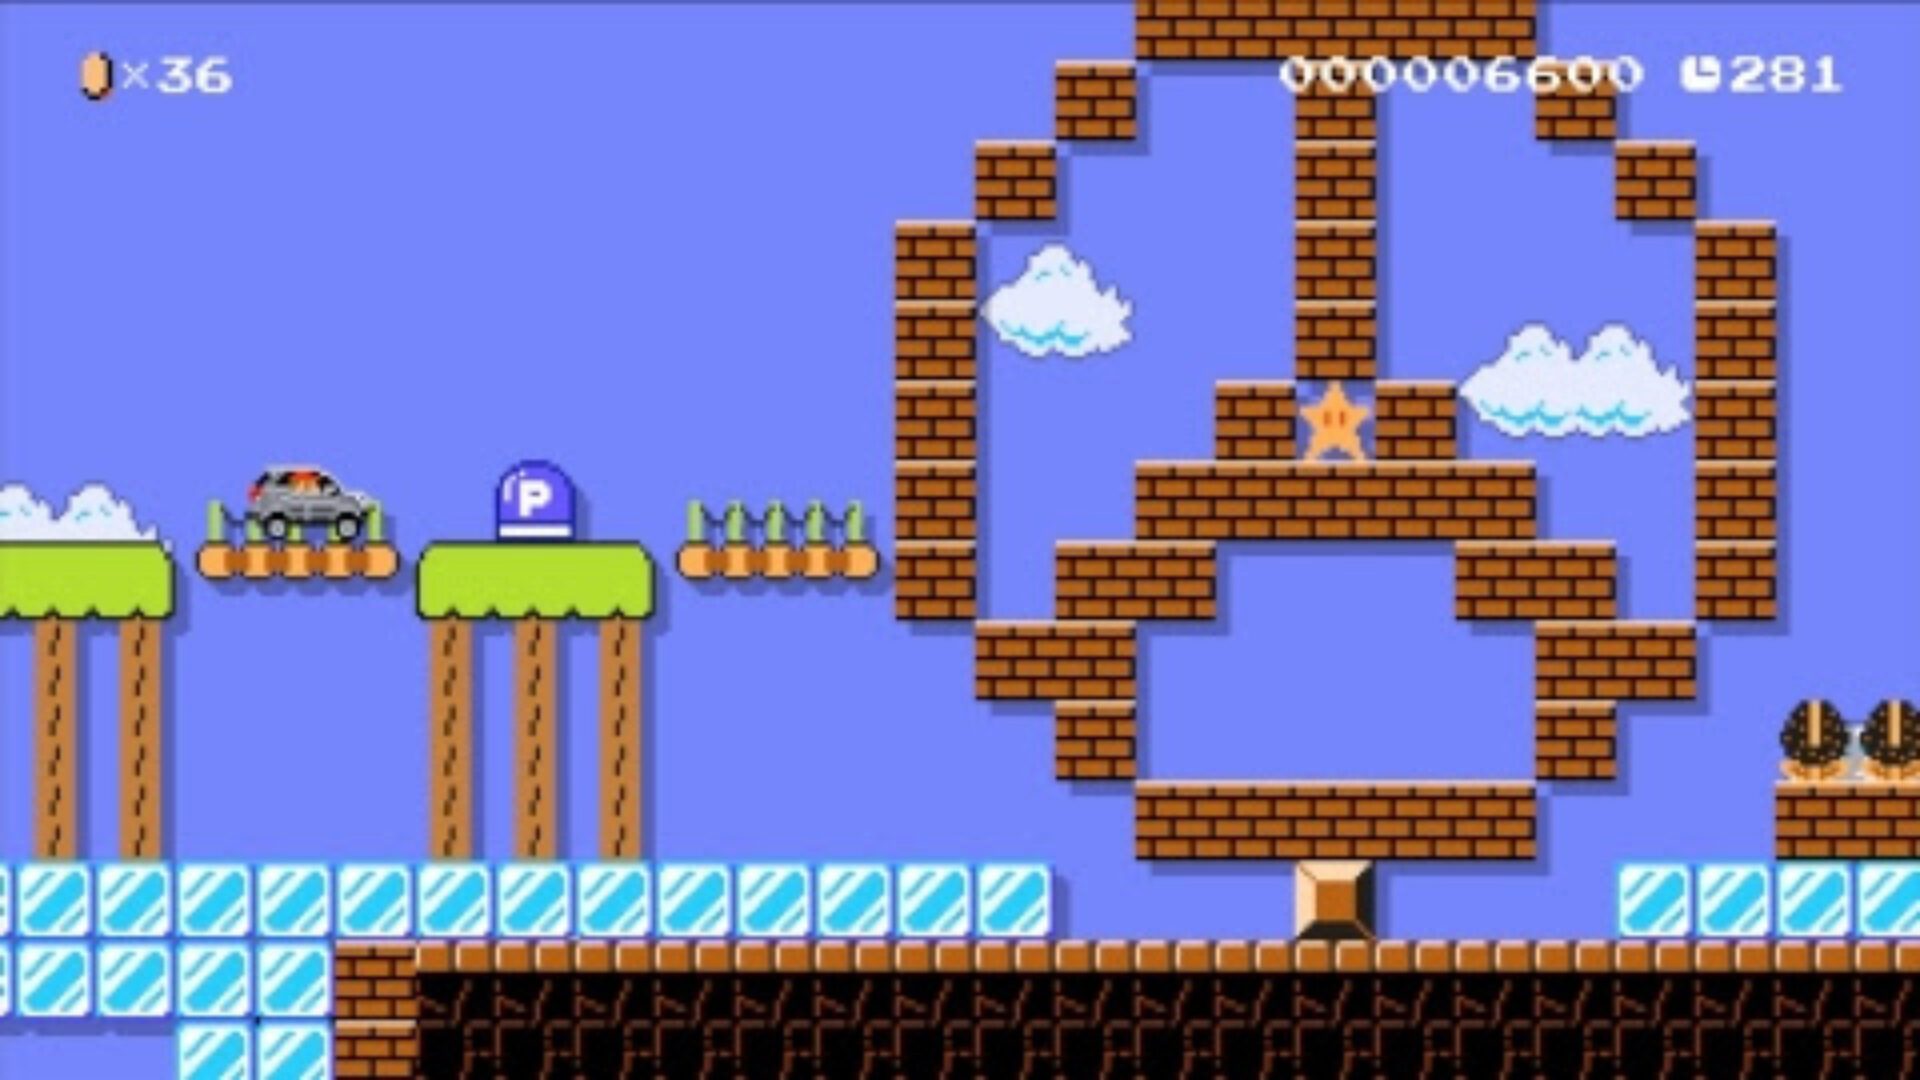 Nintendo Teams up with Mercedes-Benz to provide Free Content to Super Mario Maker